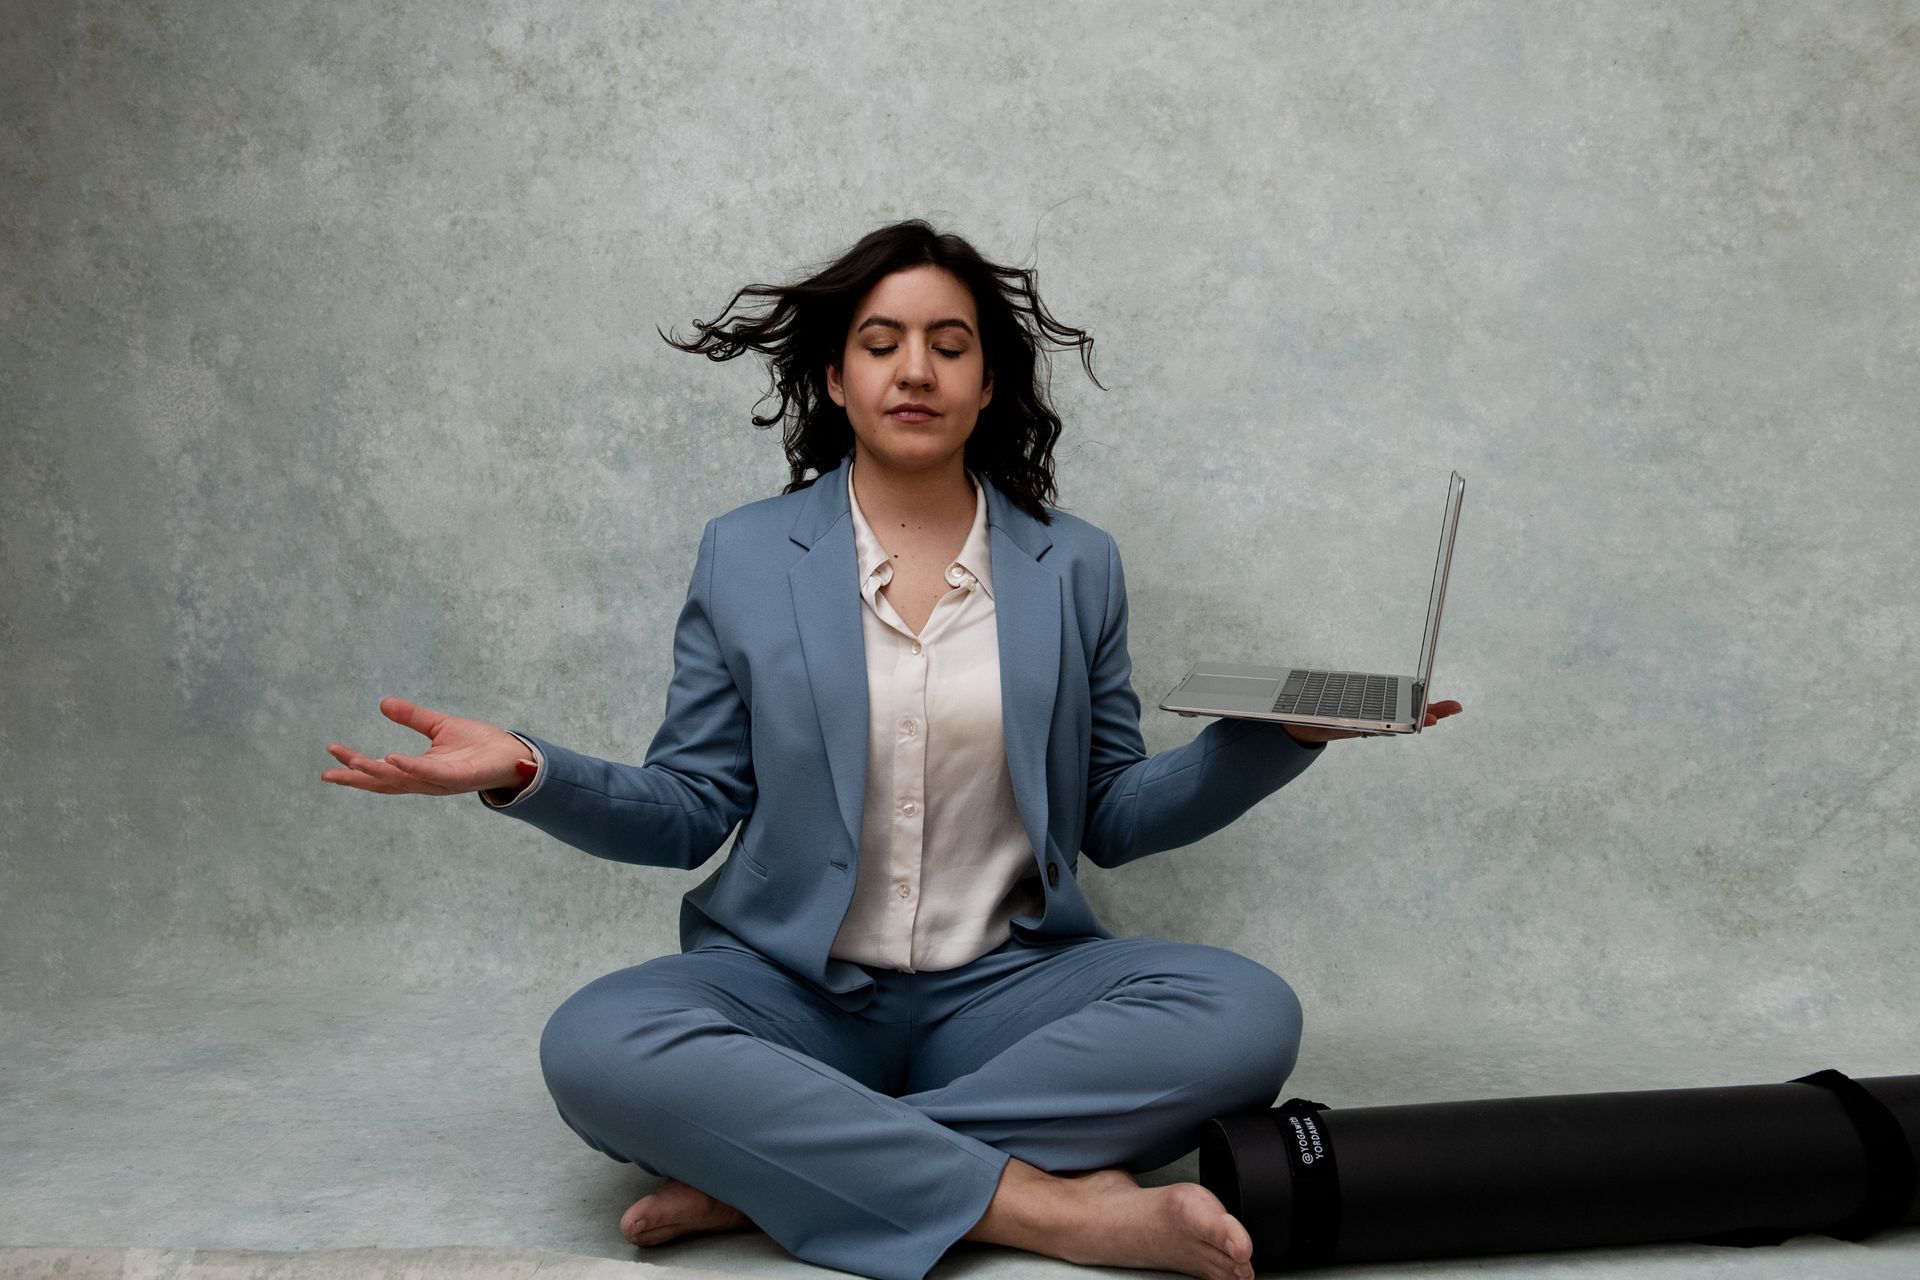 yoga in a business suit